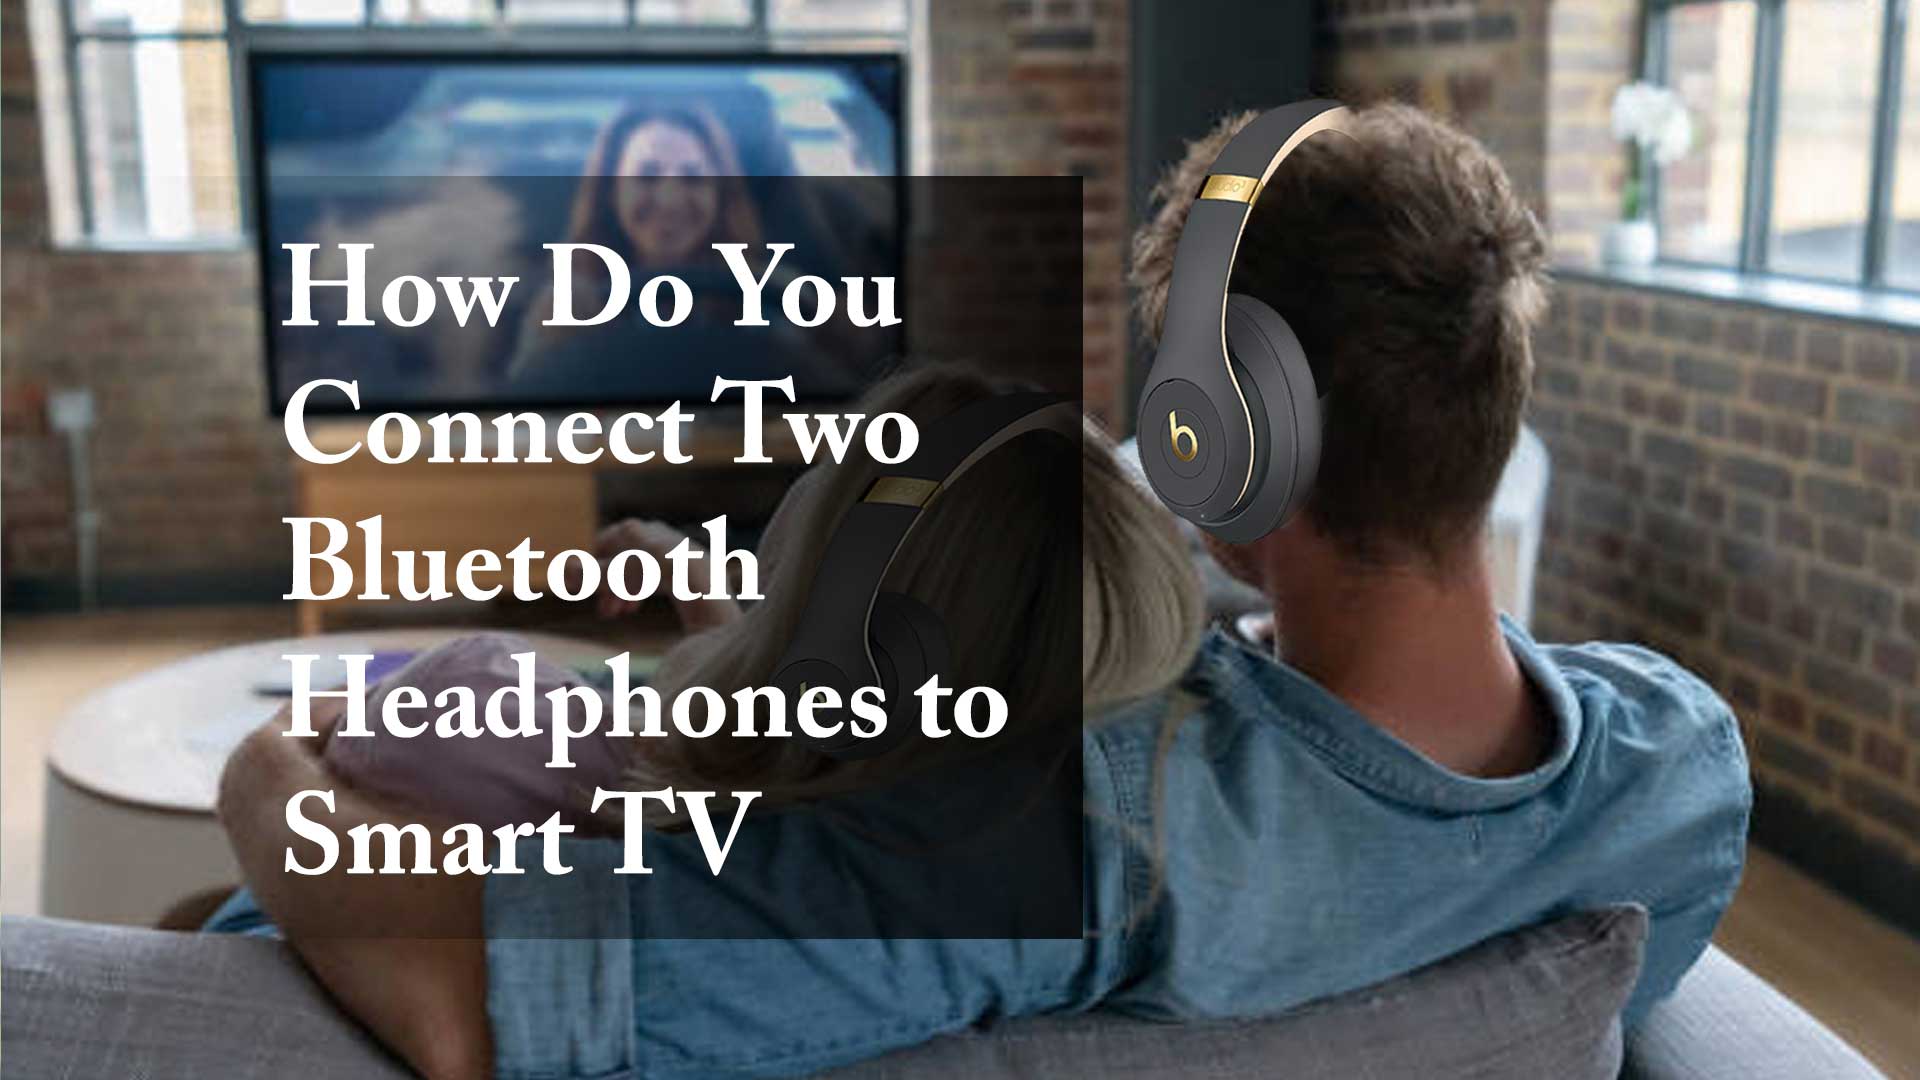 How Do You Connect Two Bluetooth Headphones to Smart TV